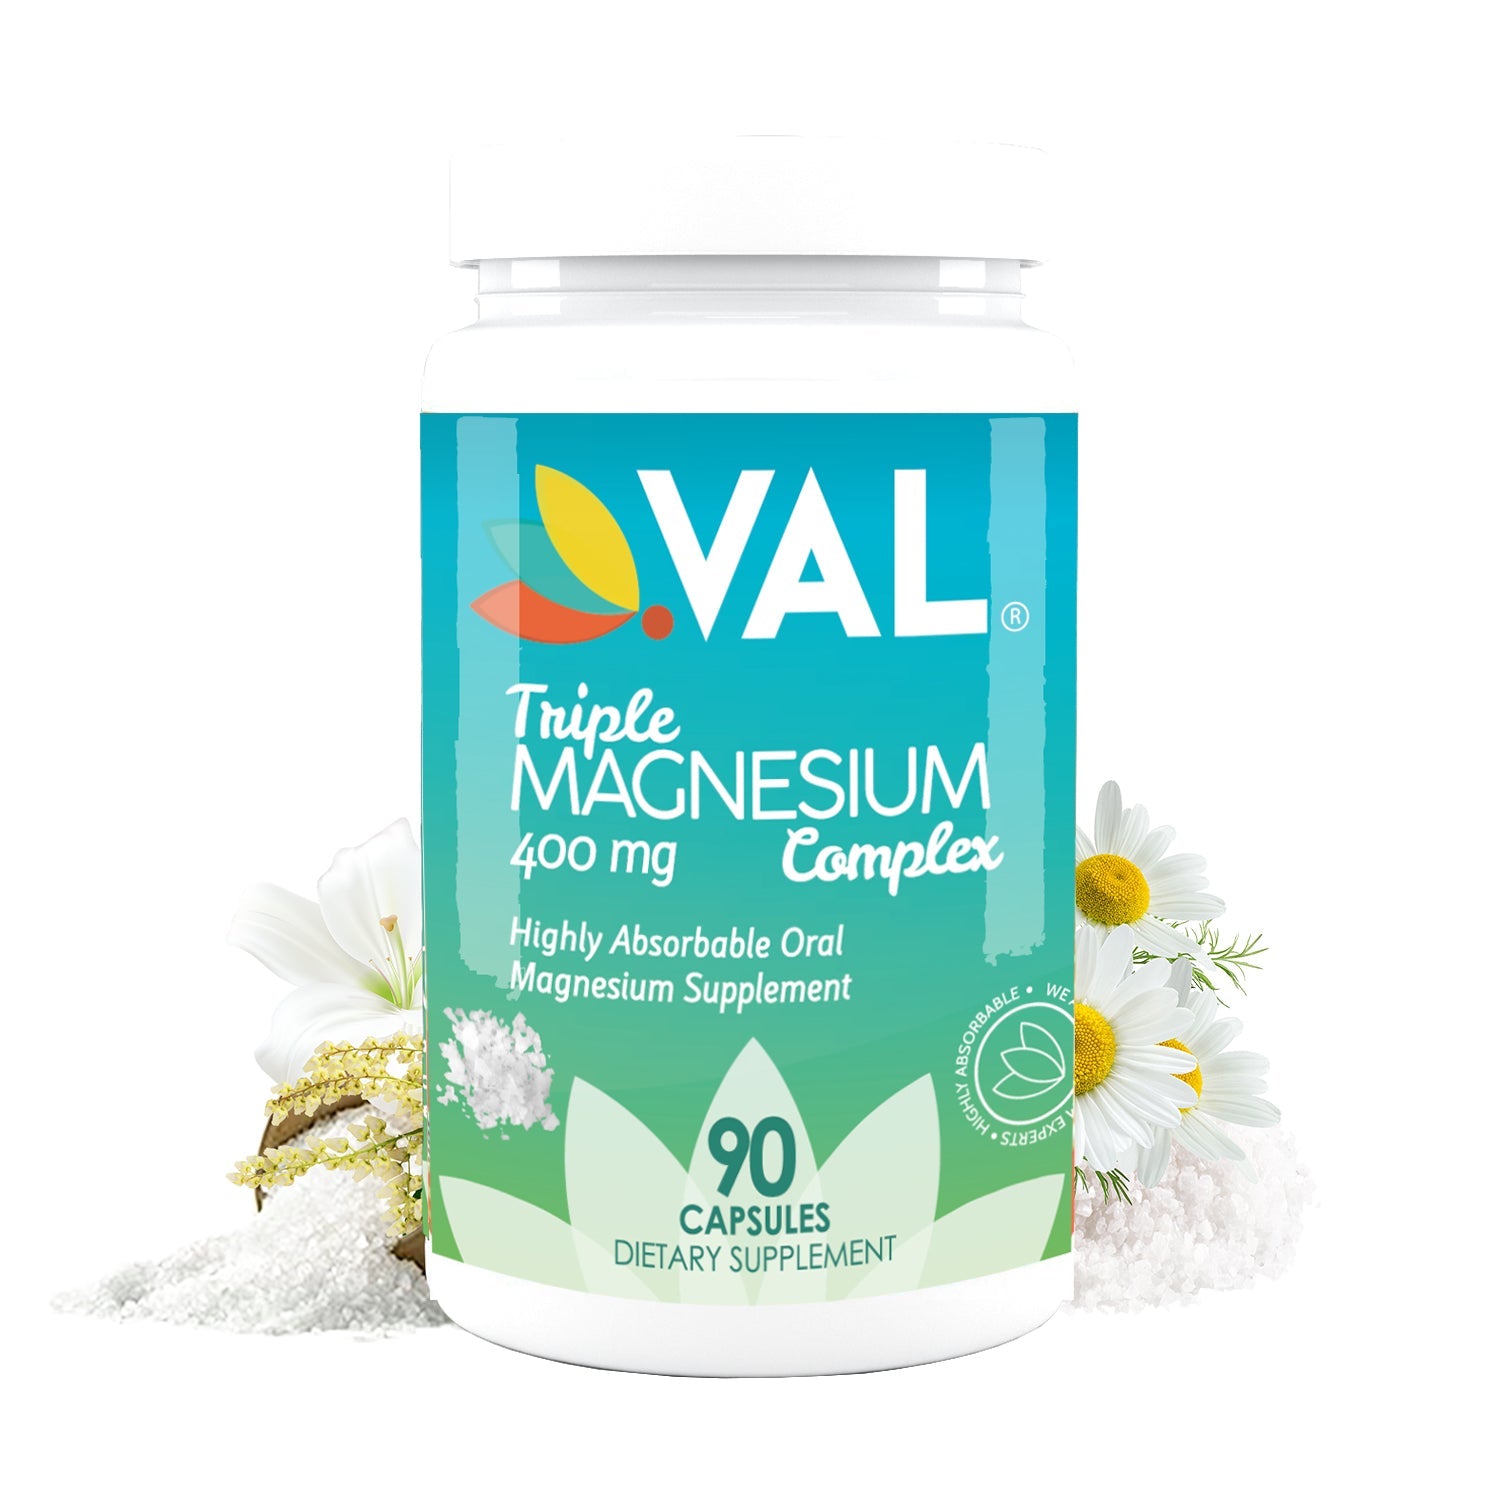 VAL Triple Magnesium Complex 400mg - Muscle Relaxation, Sleep, Support Calm, Energy Support, Healthy Magnesium Levels - 90 Capsules - Val Supplements